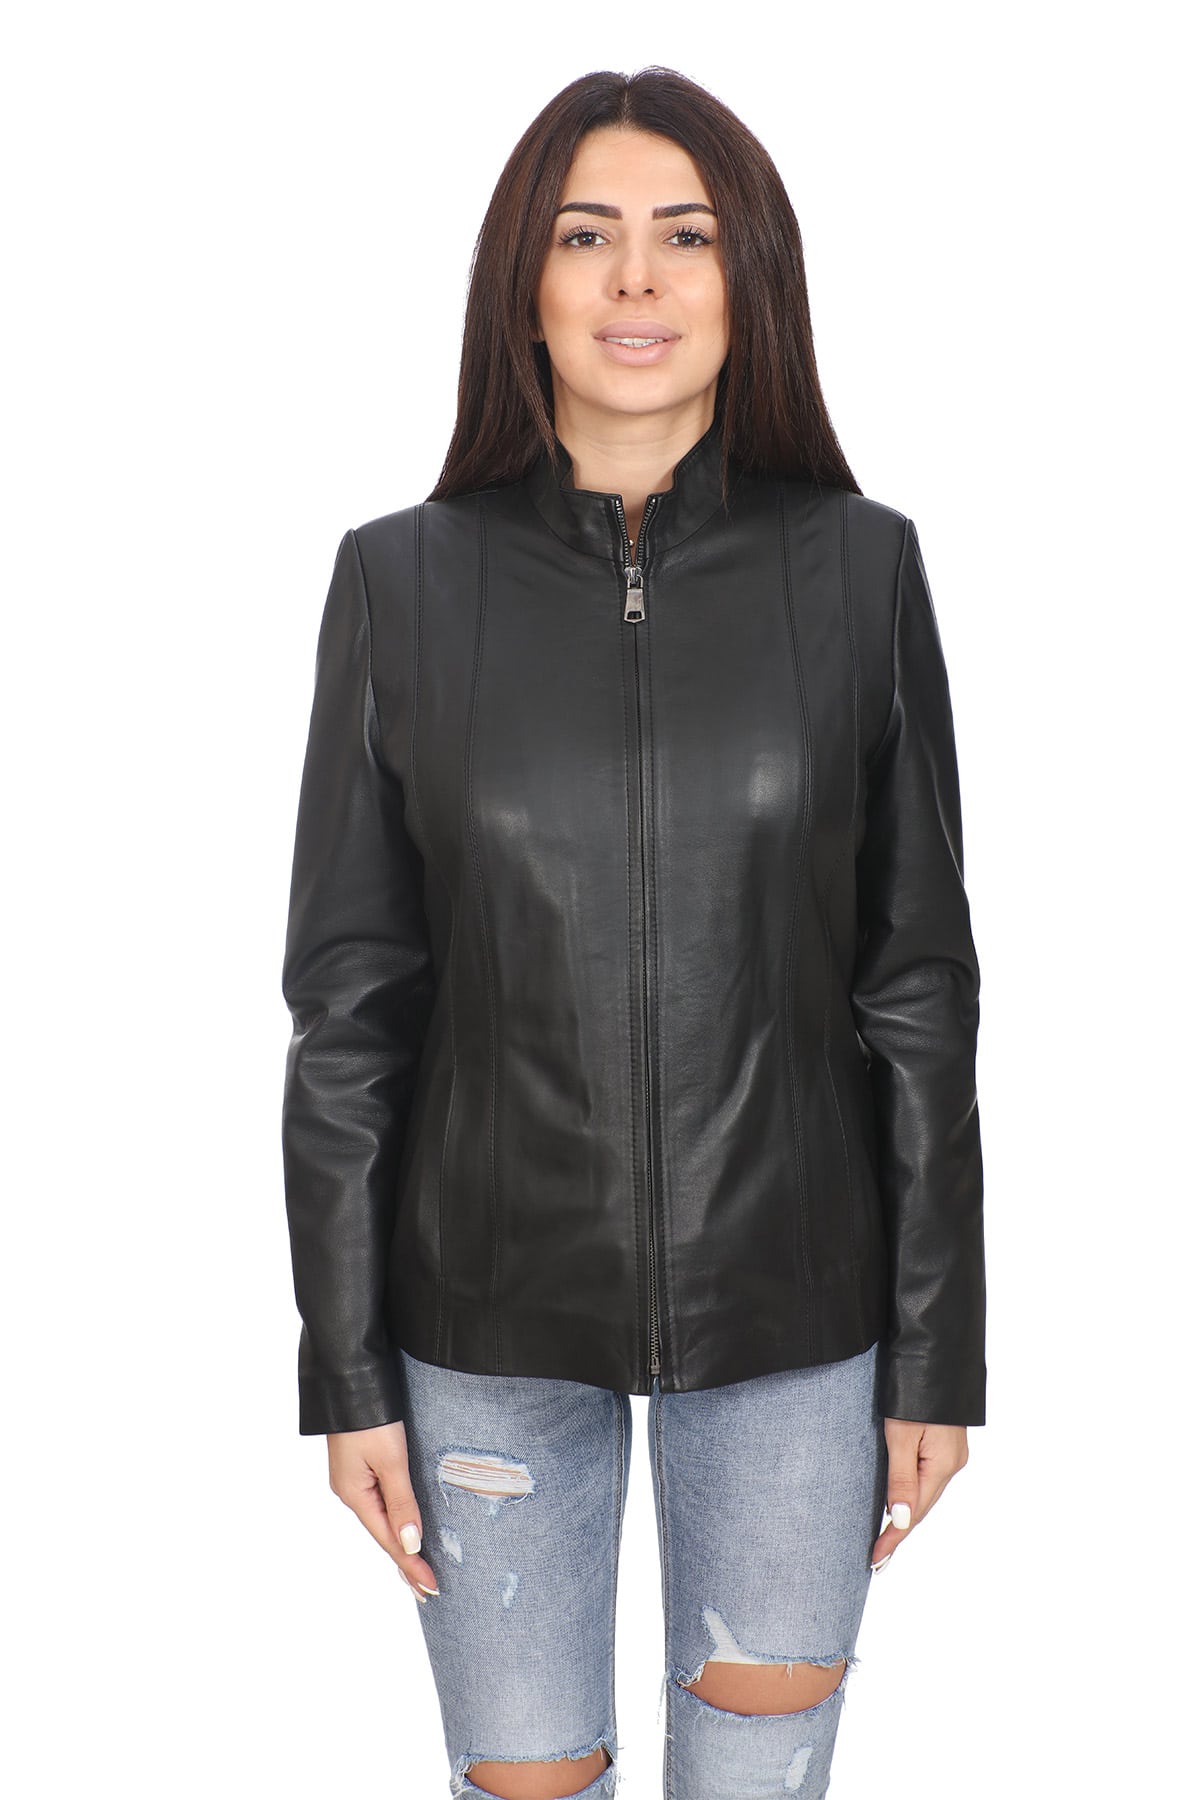 Janet Women's 100 % Real Black Leather Jacket